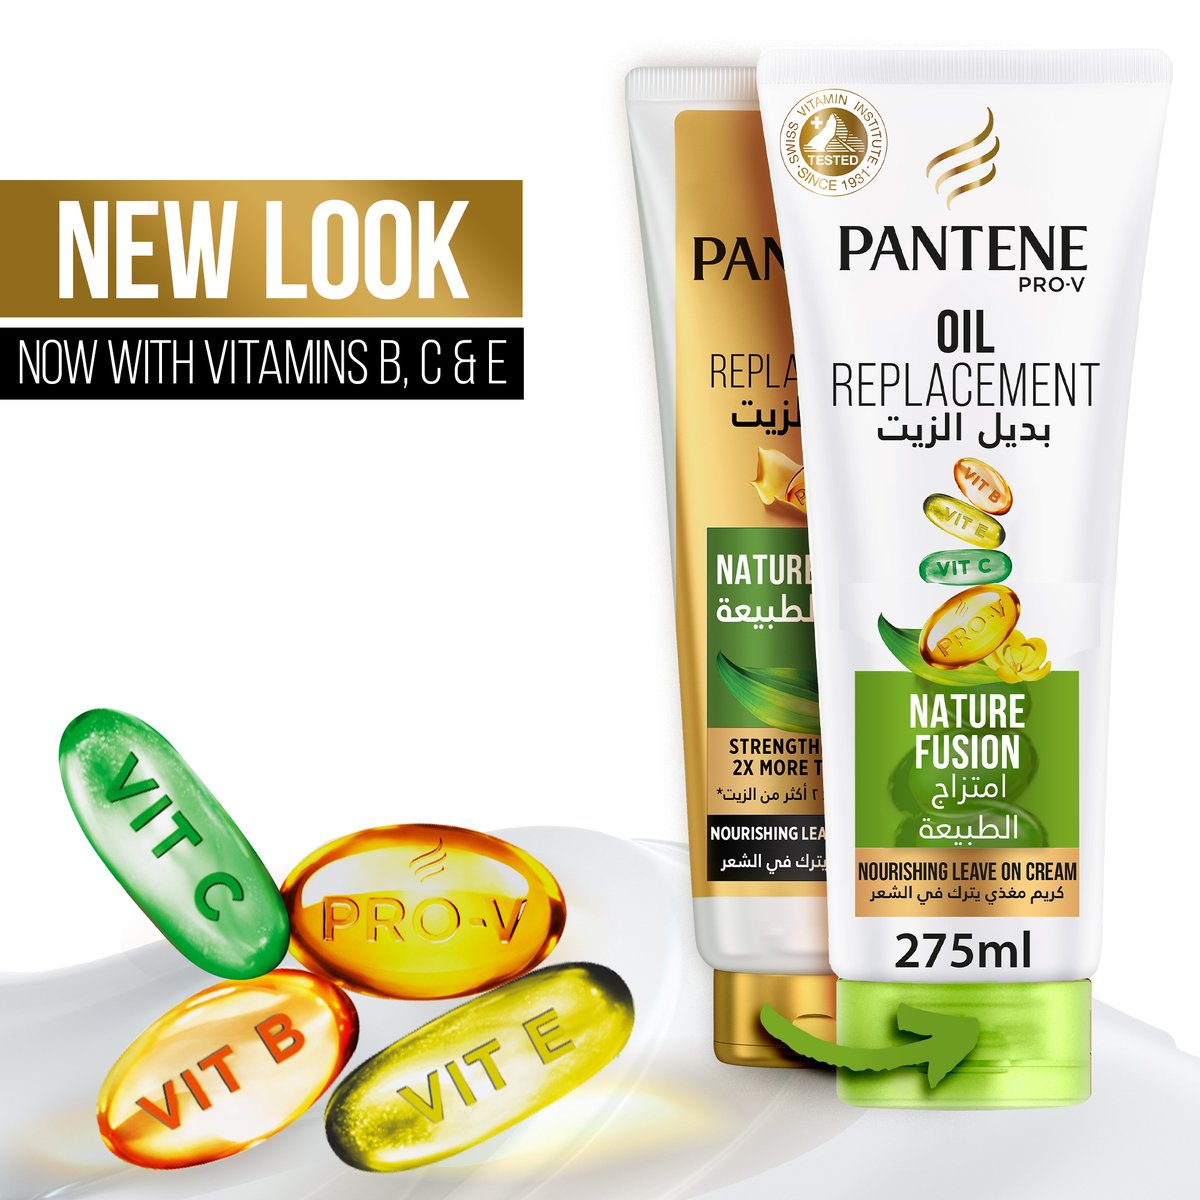 Pantene Pro-V Hair Oil Replacement Leave On Cream Nature Fusion 275 ml